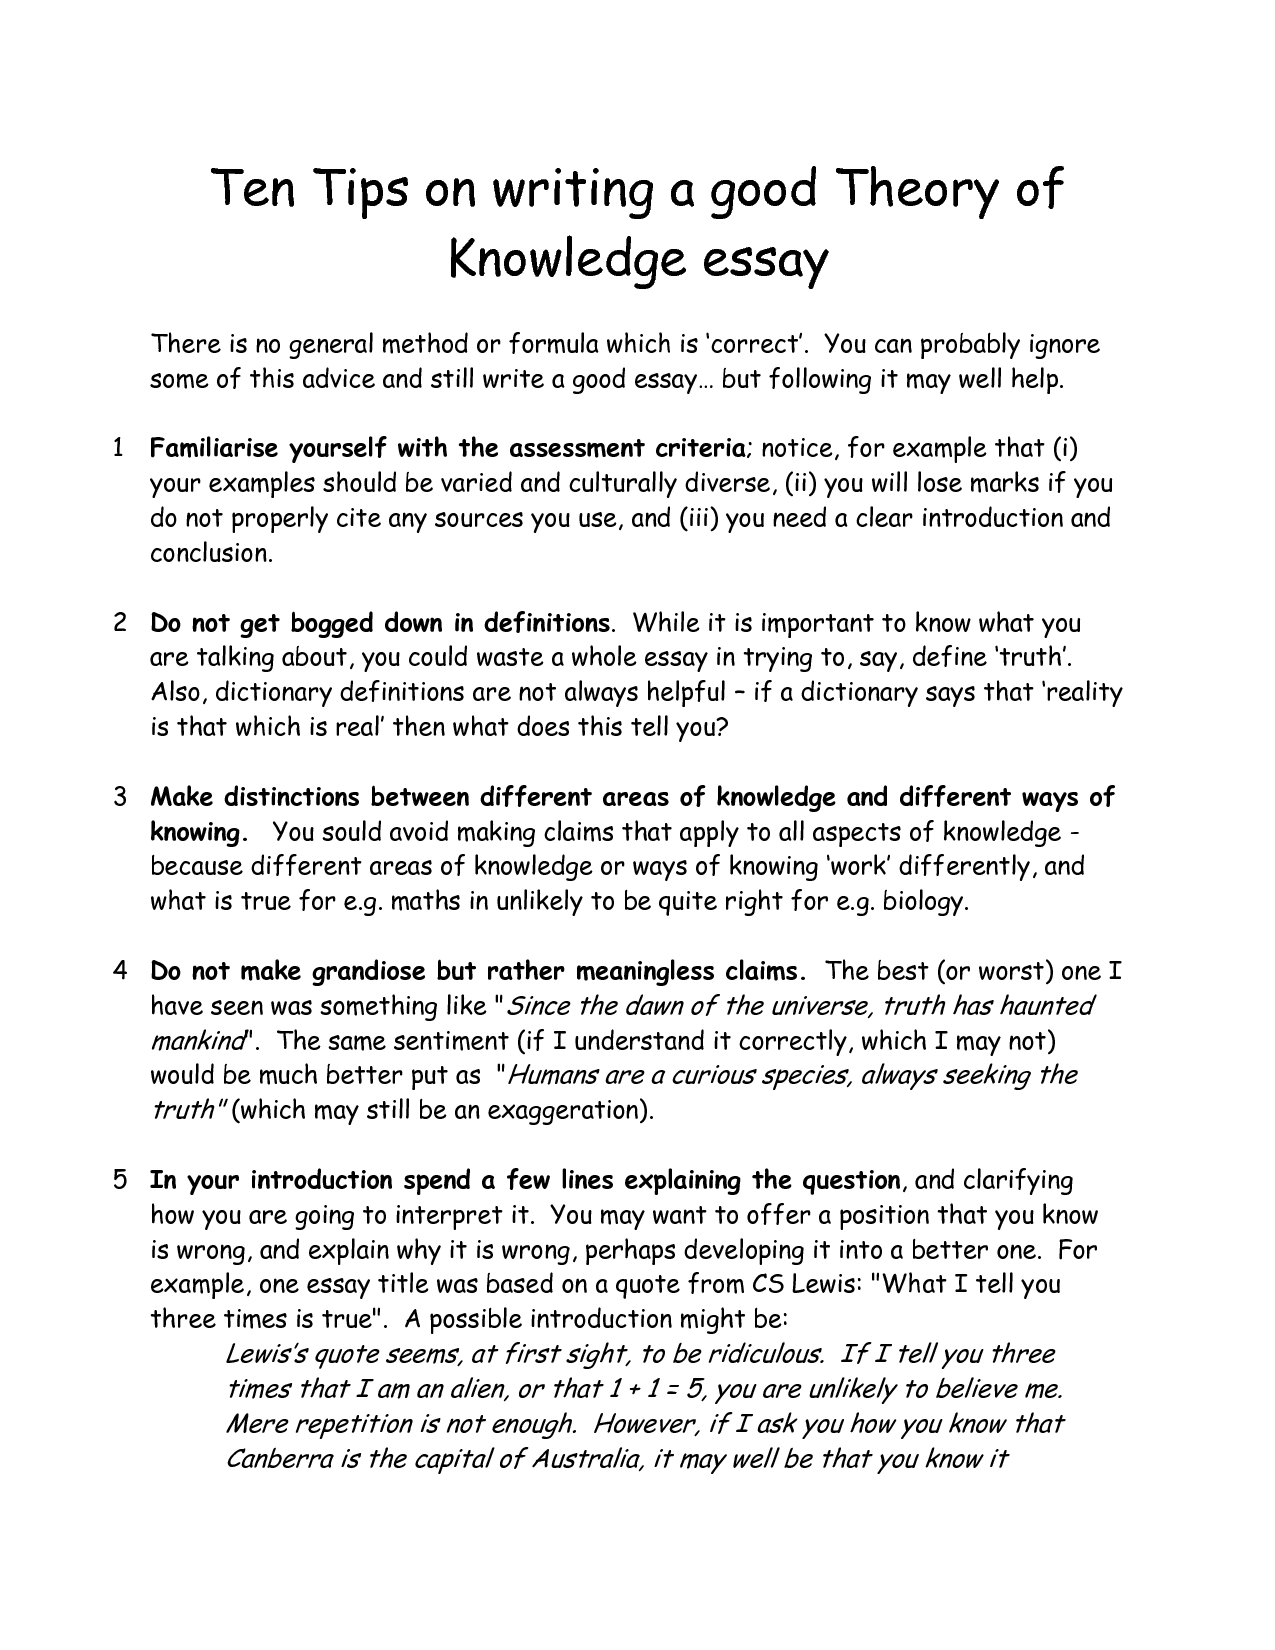 write about yourself essay